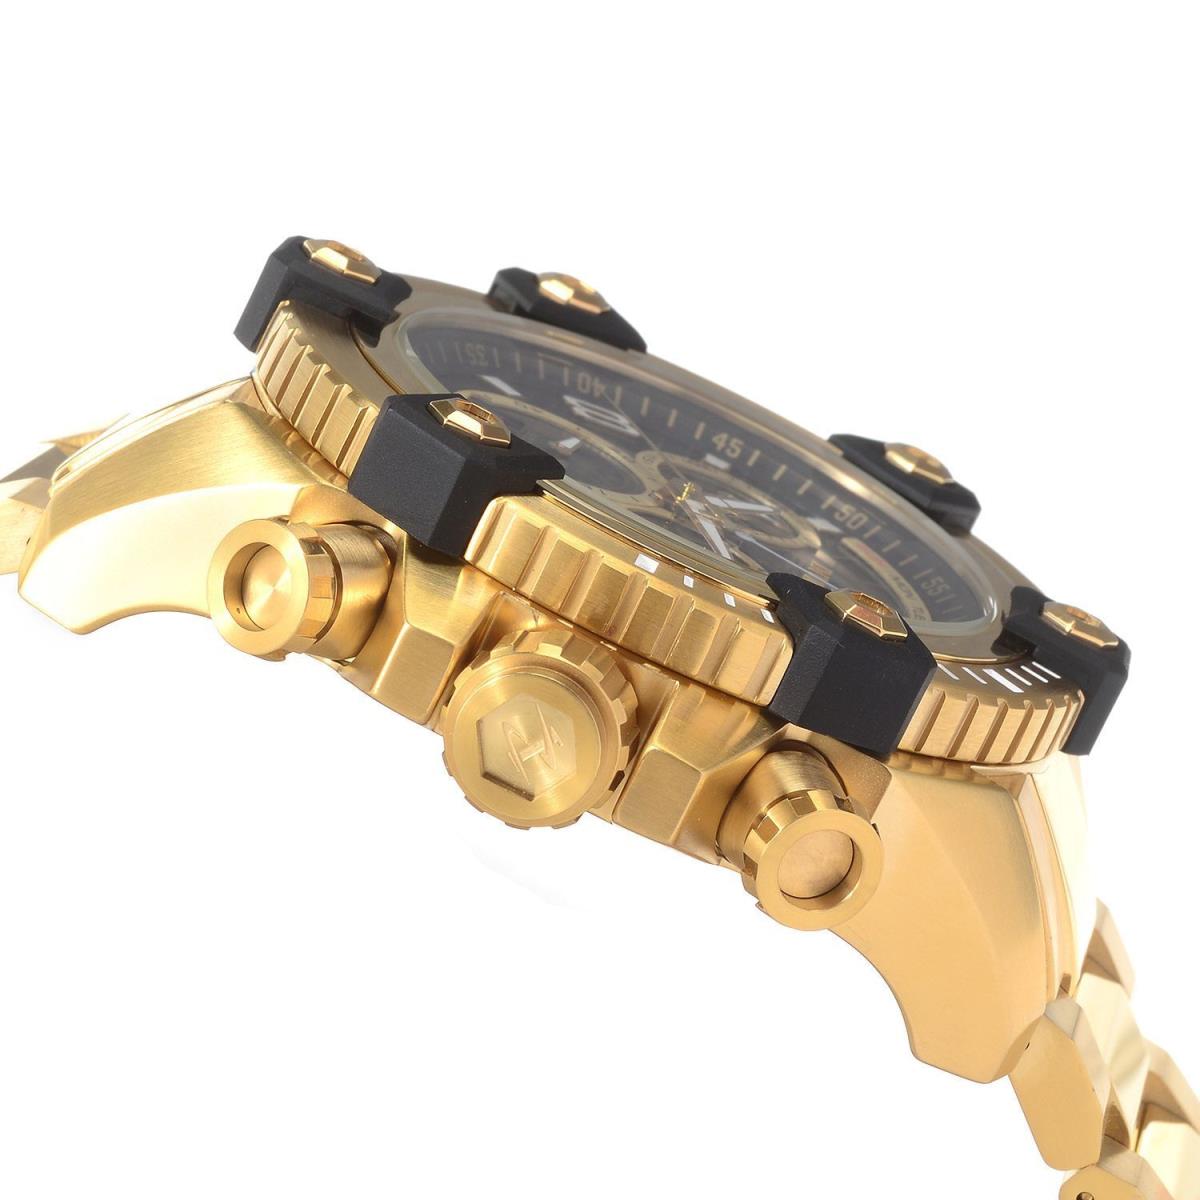 Invicta watch  - Blak Mother Of Pearl Dial, Gold Band